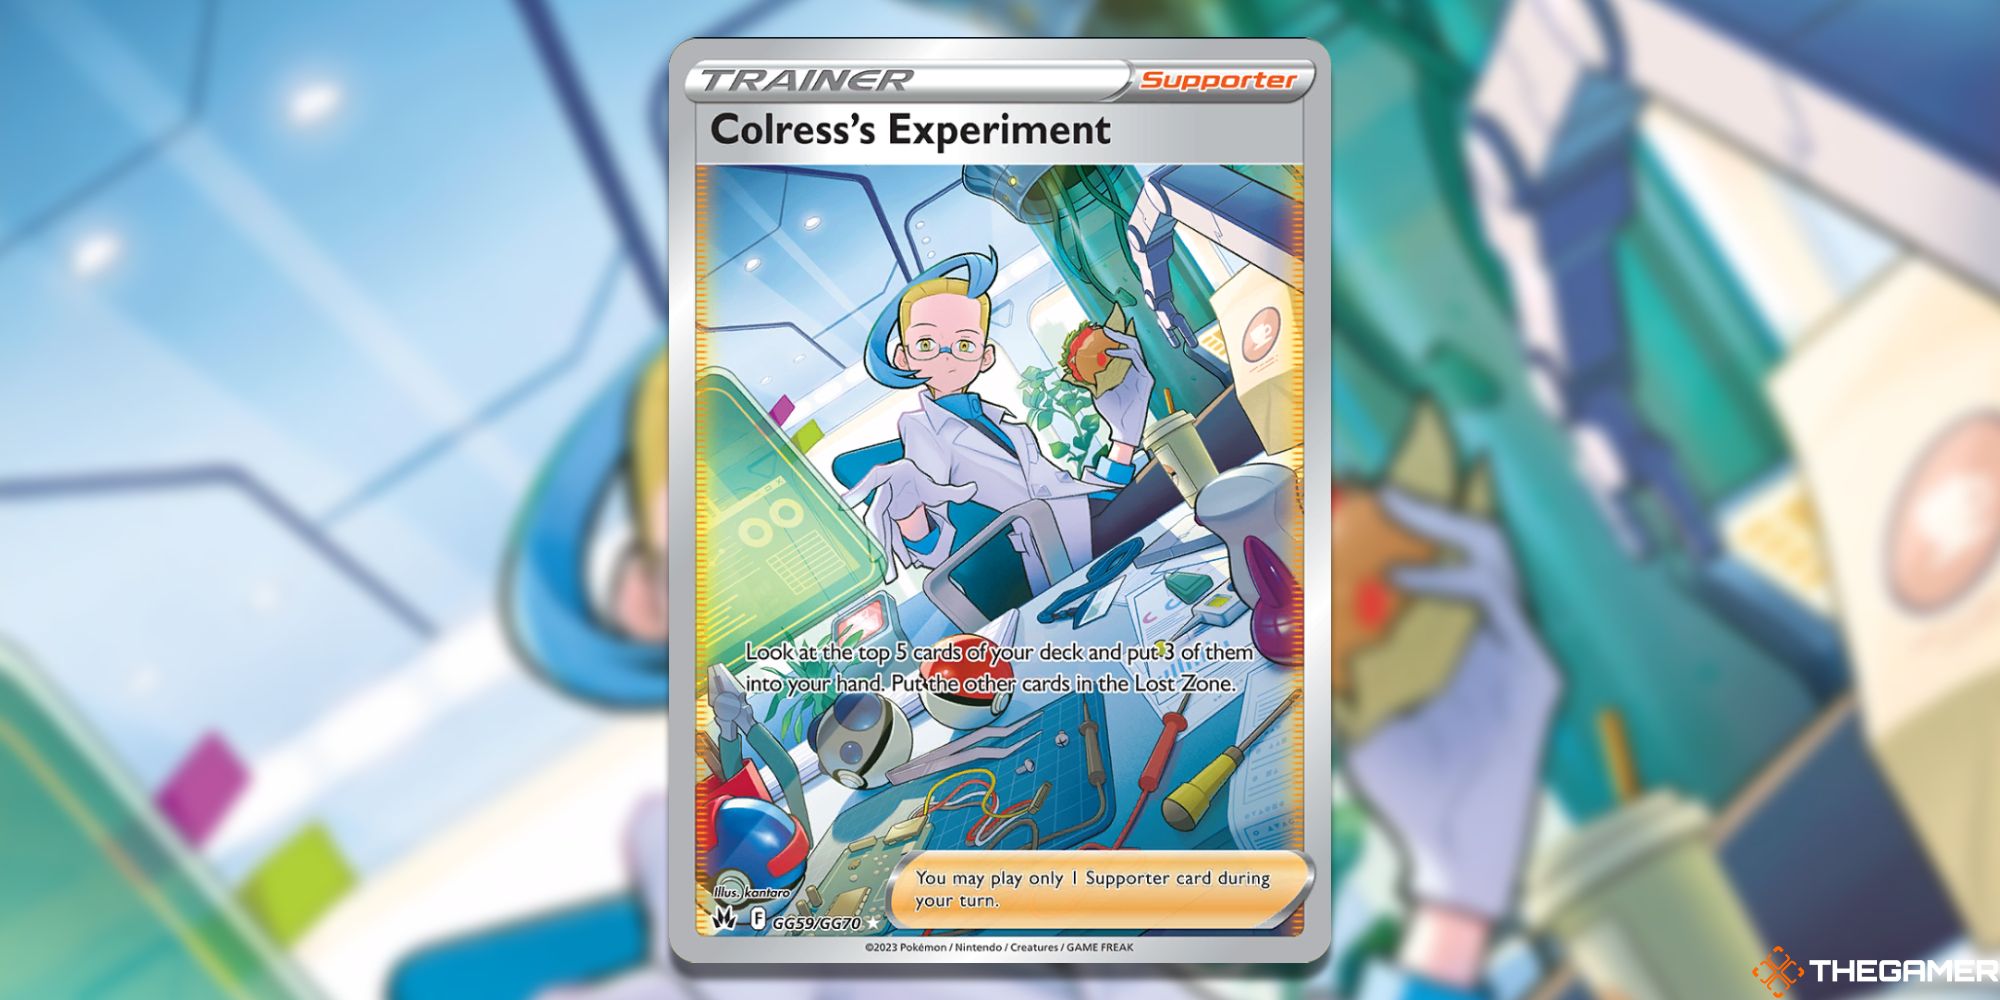 Colress's Experiment Galarian Card from the Pokémon TCG